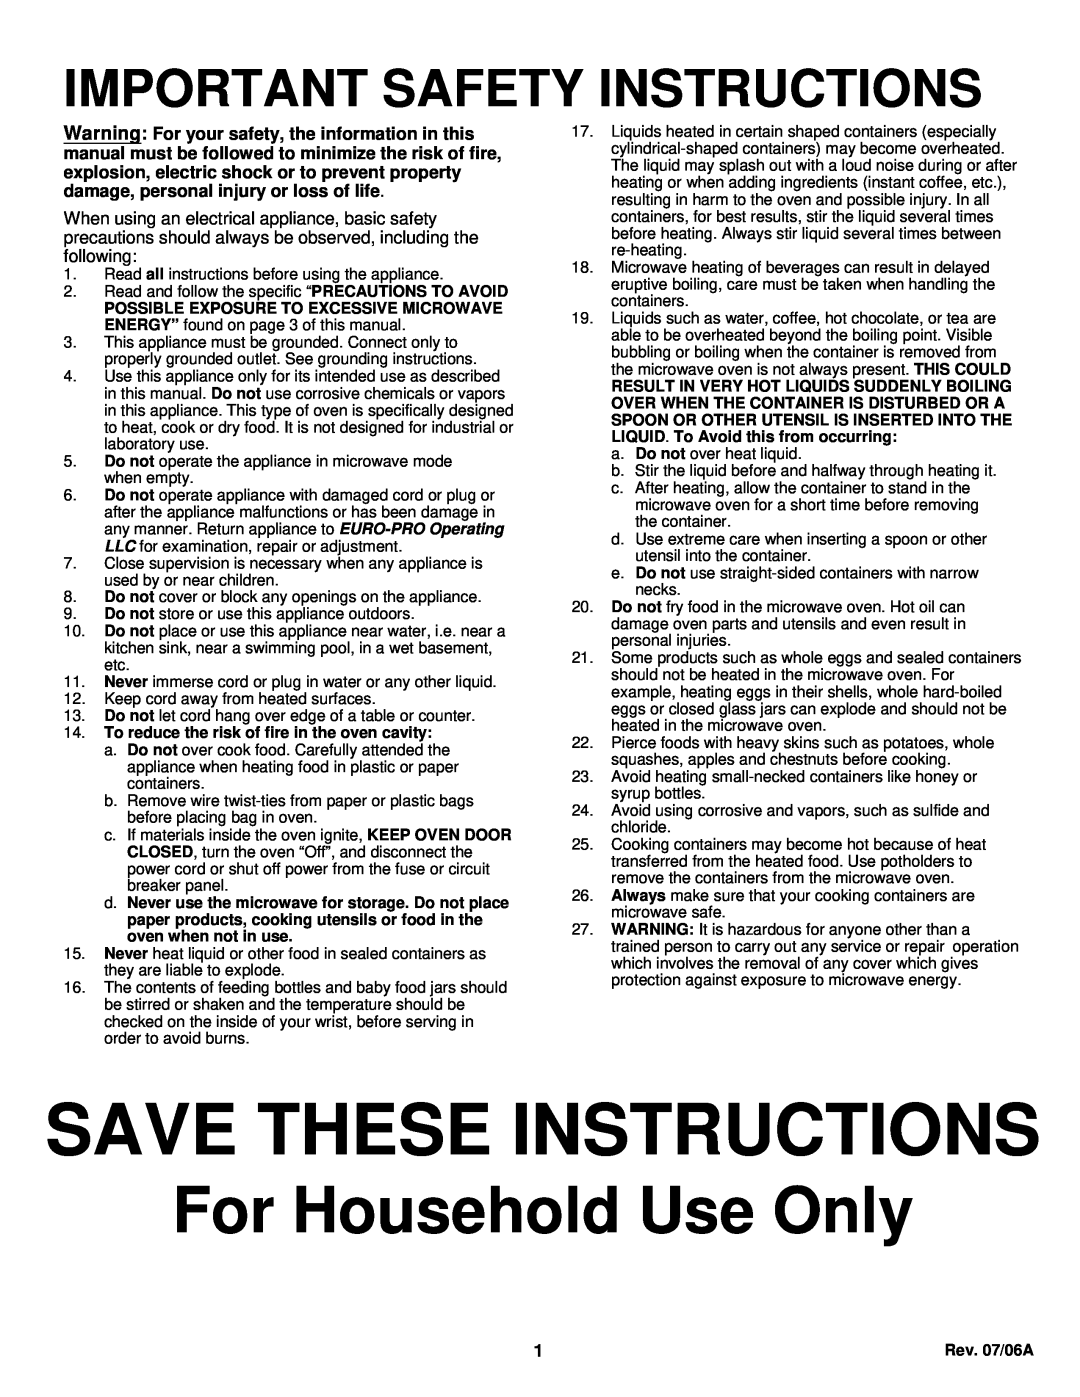 Bravetti K5309H owner manual Save These Instructions, For Household Use Only, Important Safety Instructions 